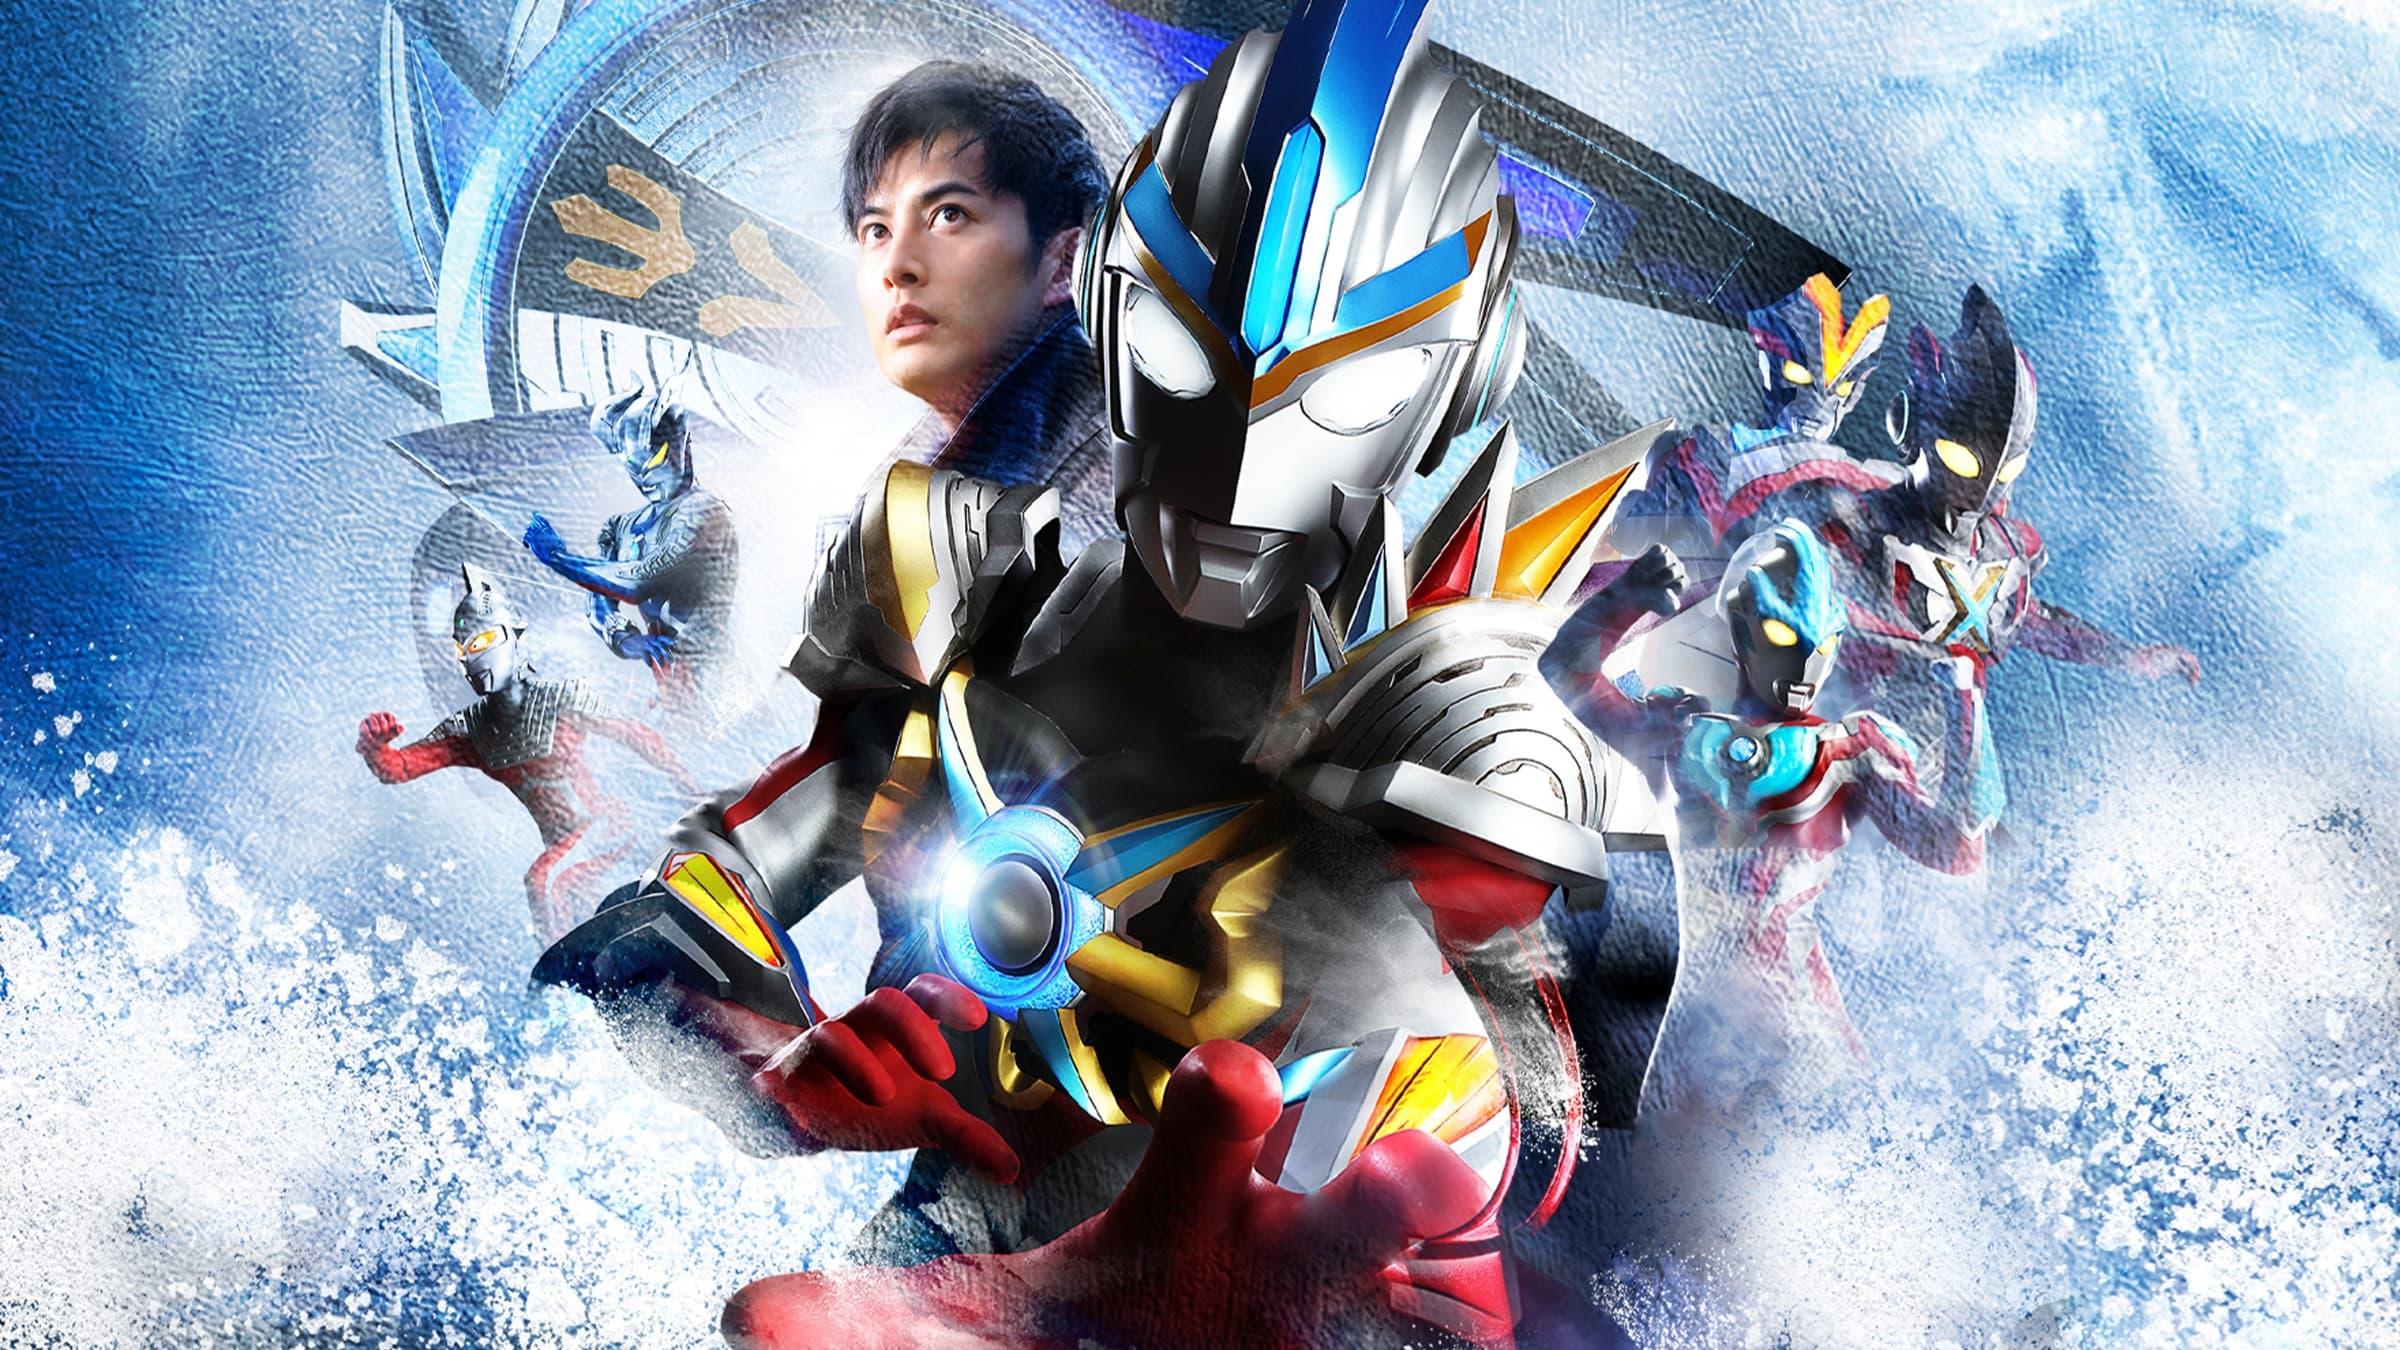 Ultraman Orb The Movie: I'm Borrowing the Power of Your Bonds! backdrop